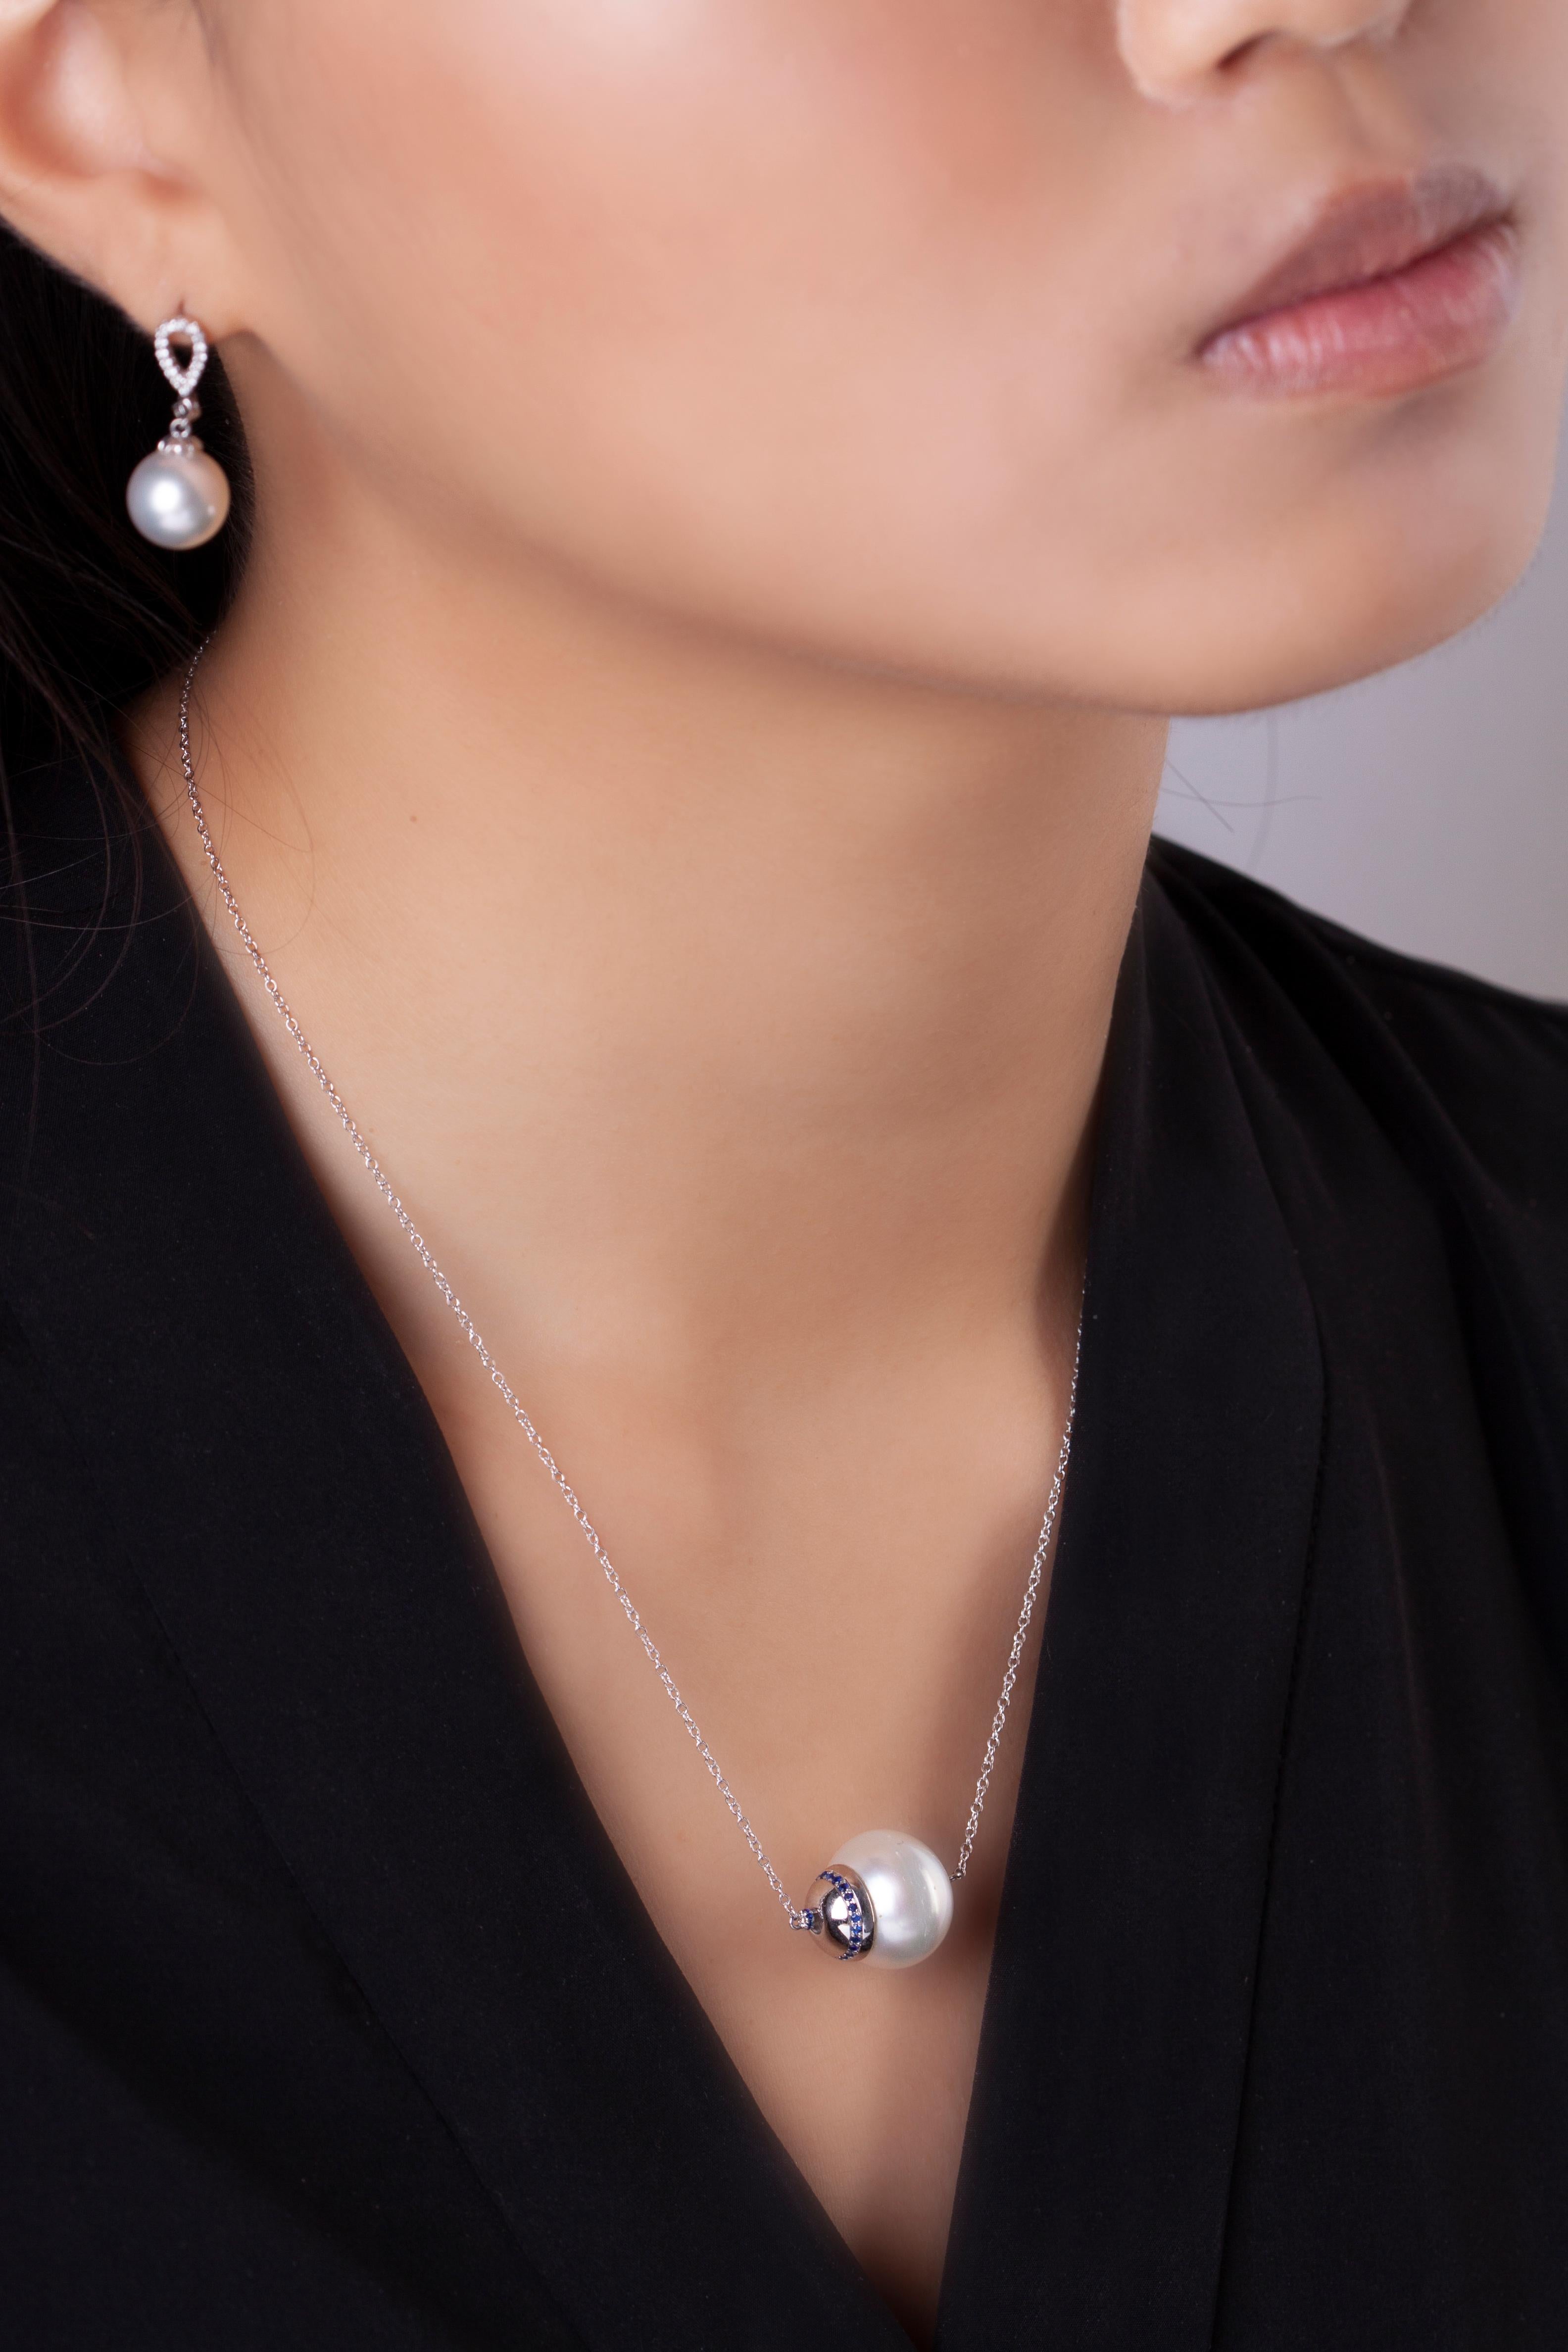 This contemporary pendant by Yoko London features a 15.5-16mm South Sea pearl set alongside a sumptuous sapphire orbit. This unique pendant will add a striking finish to both daytime and evening outfits. 
-	15.5-16mm South Sea Pearl
-	32 Sapphires